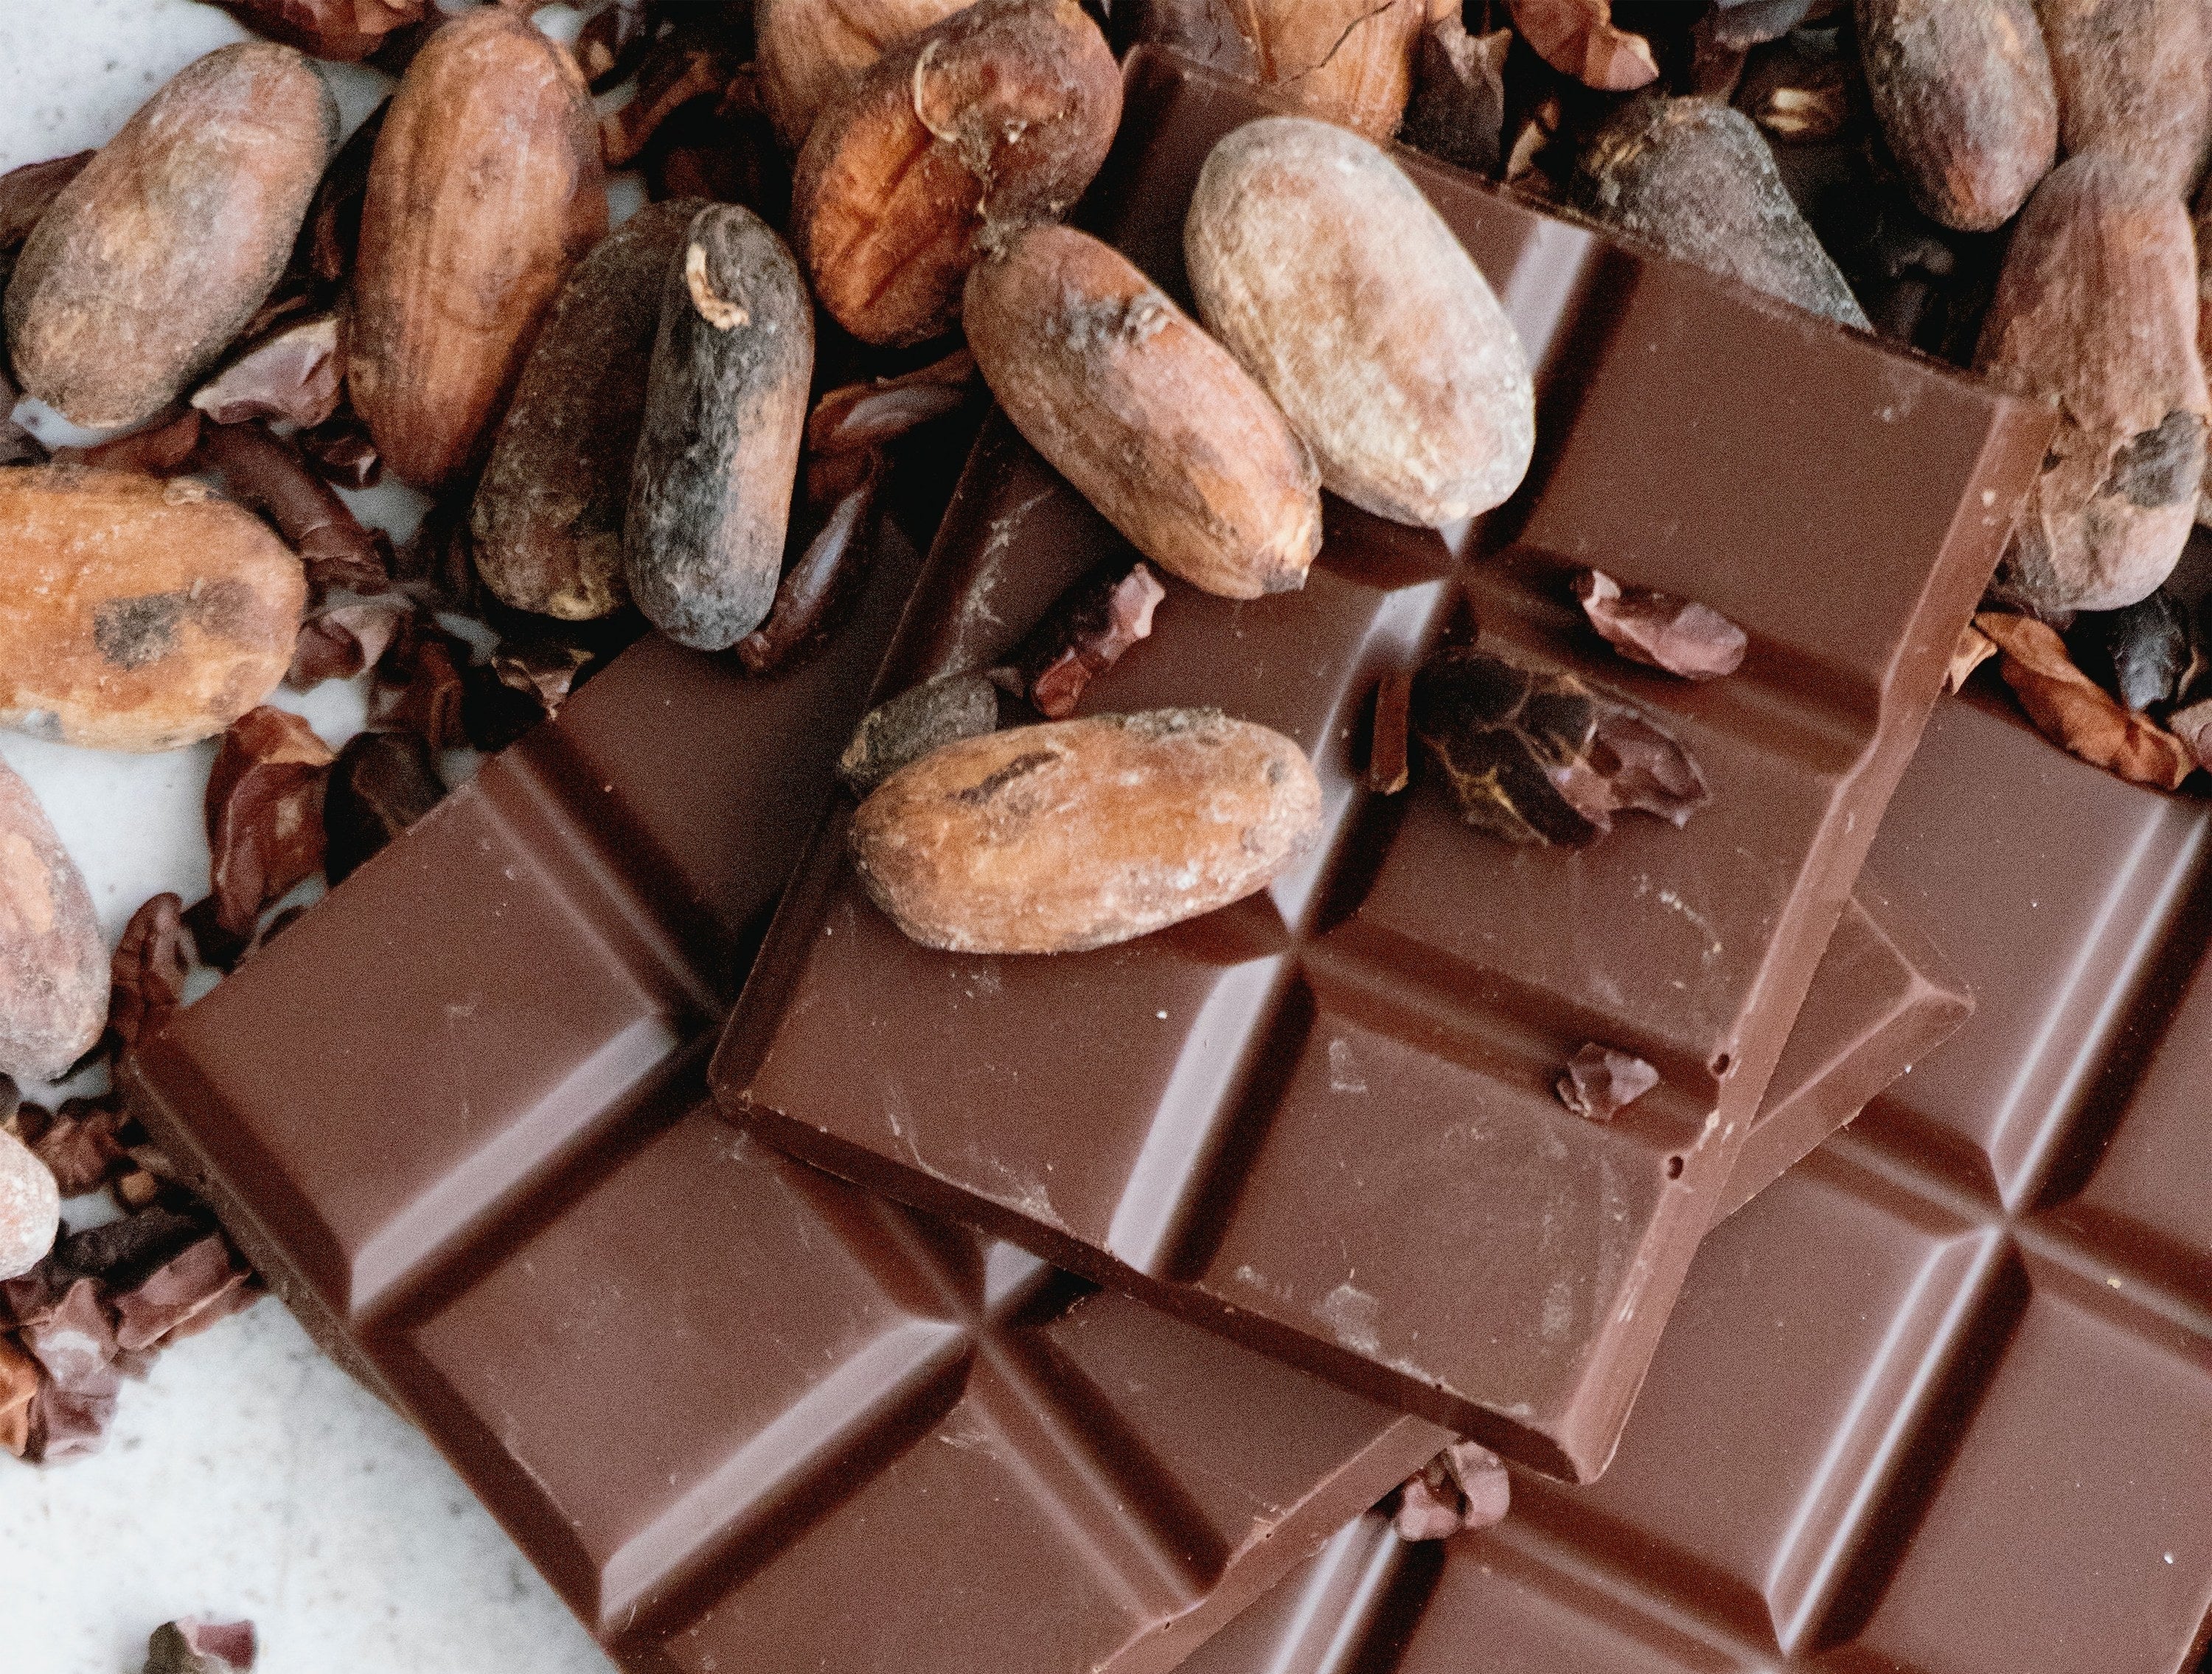 Chocolate bars and cacao beans